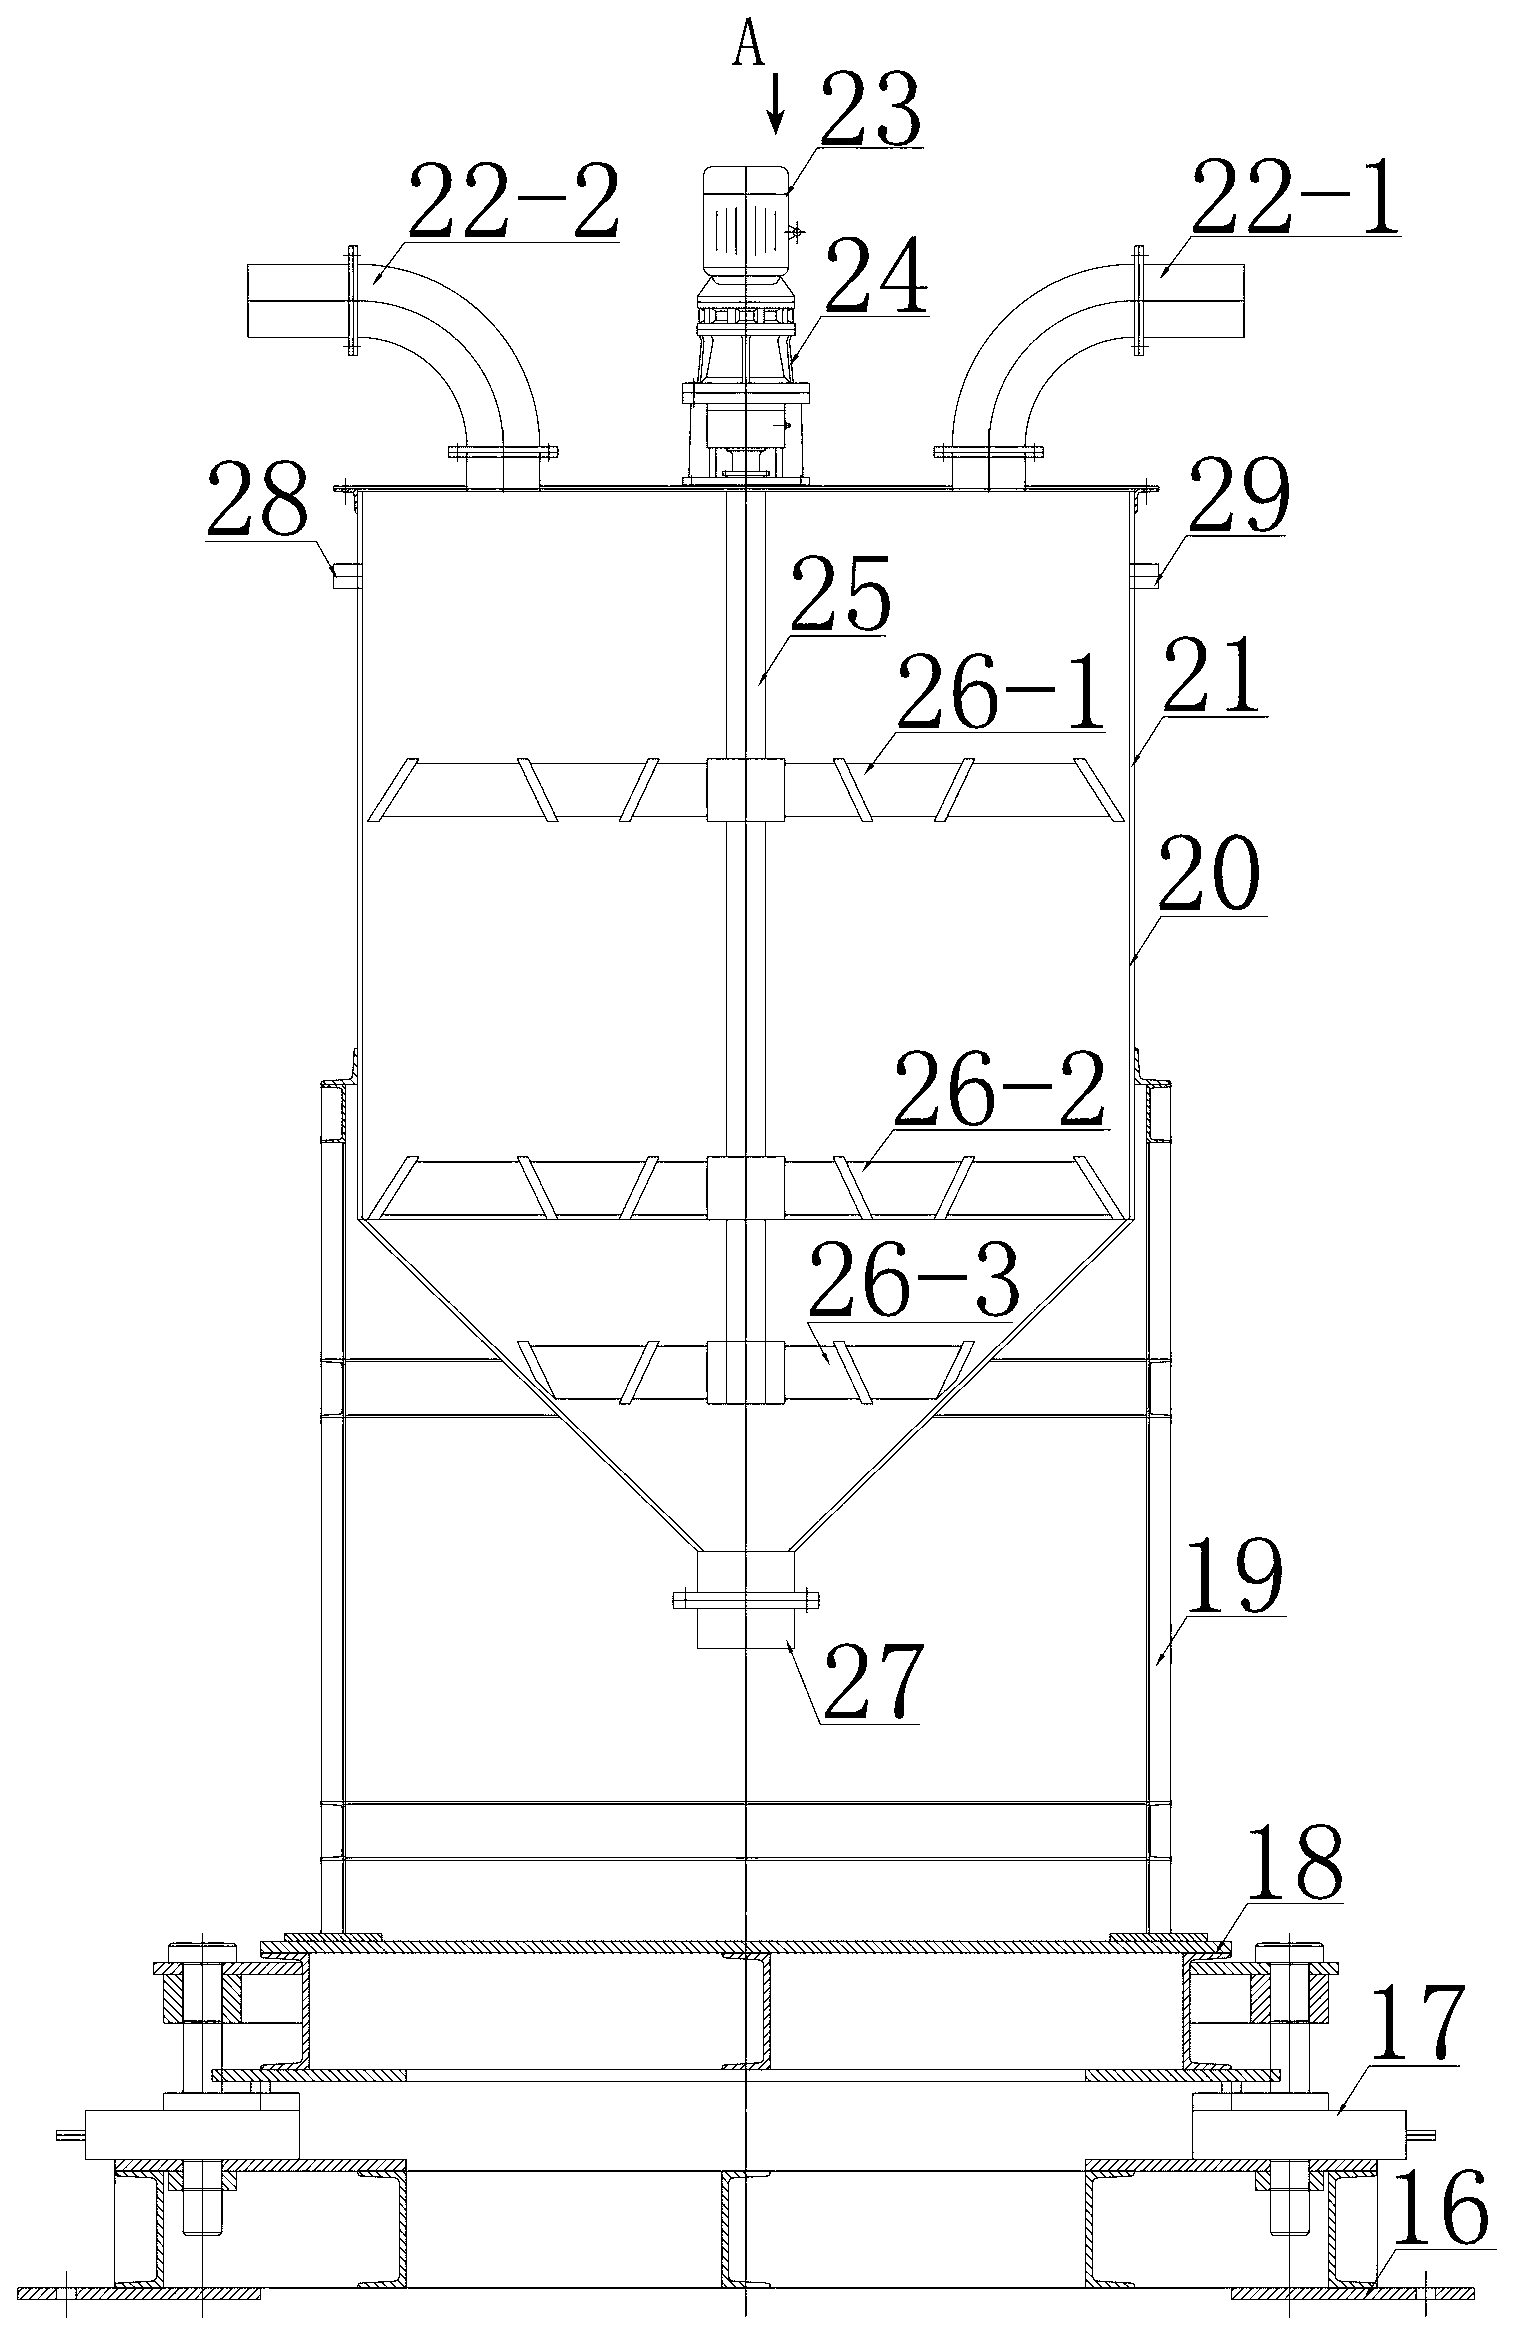 Method and equipment for industrially producing clean liquid fuel by utilizing household waste or sludge press water